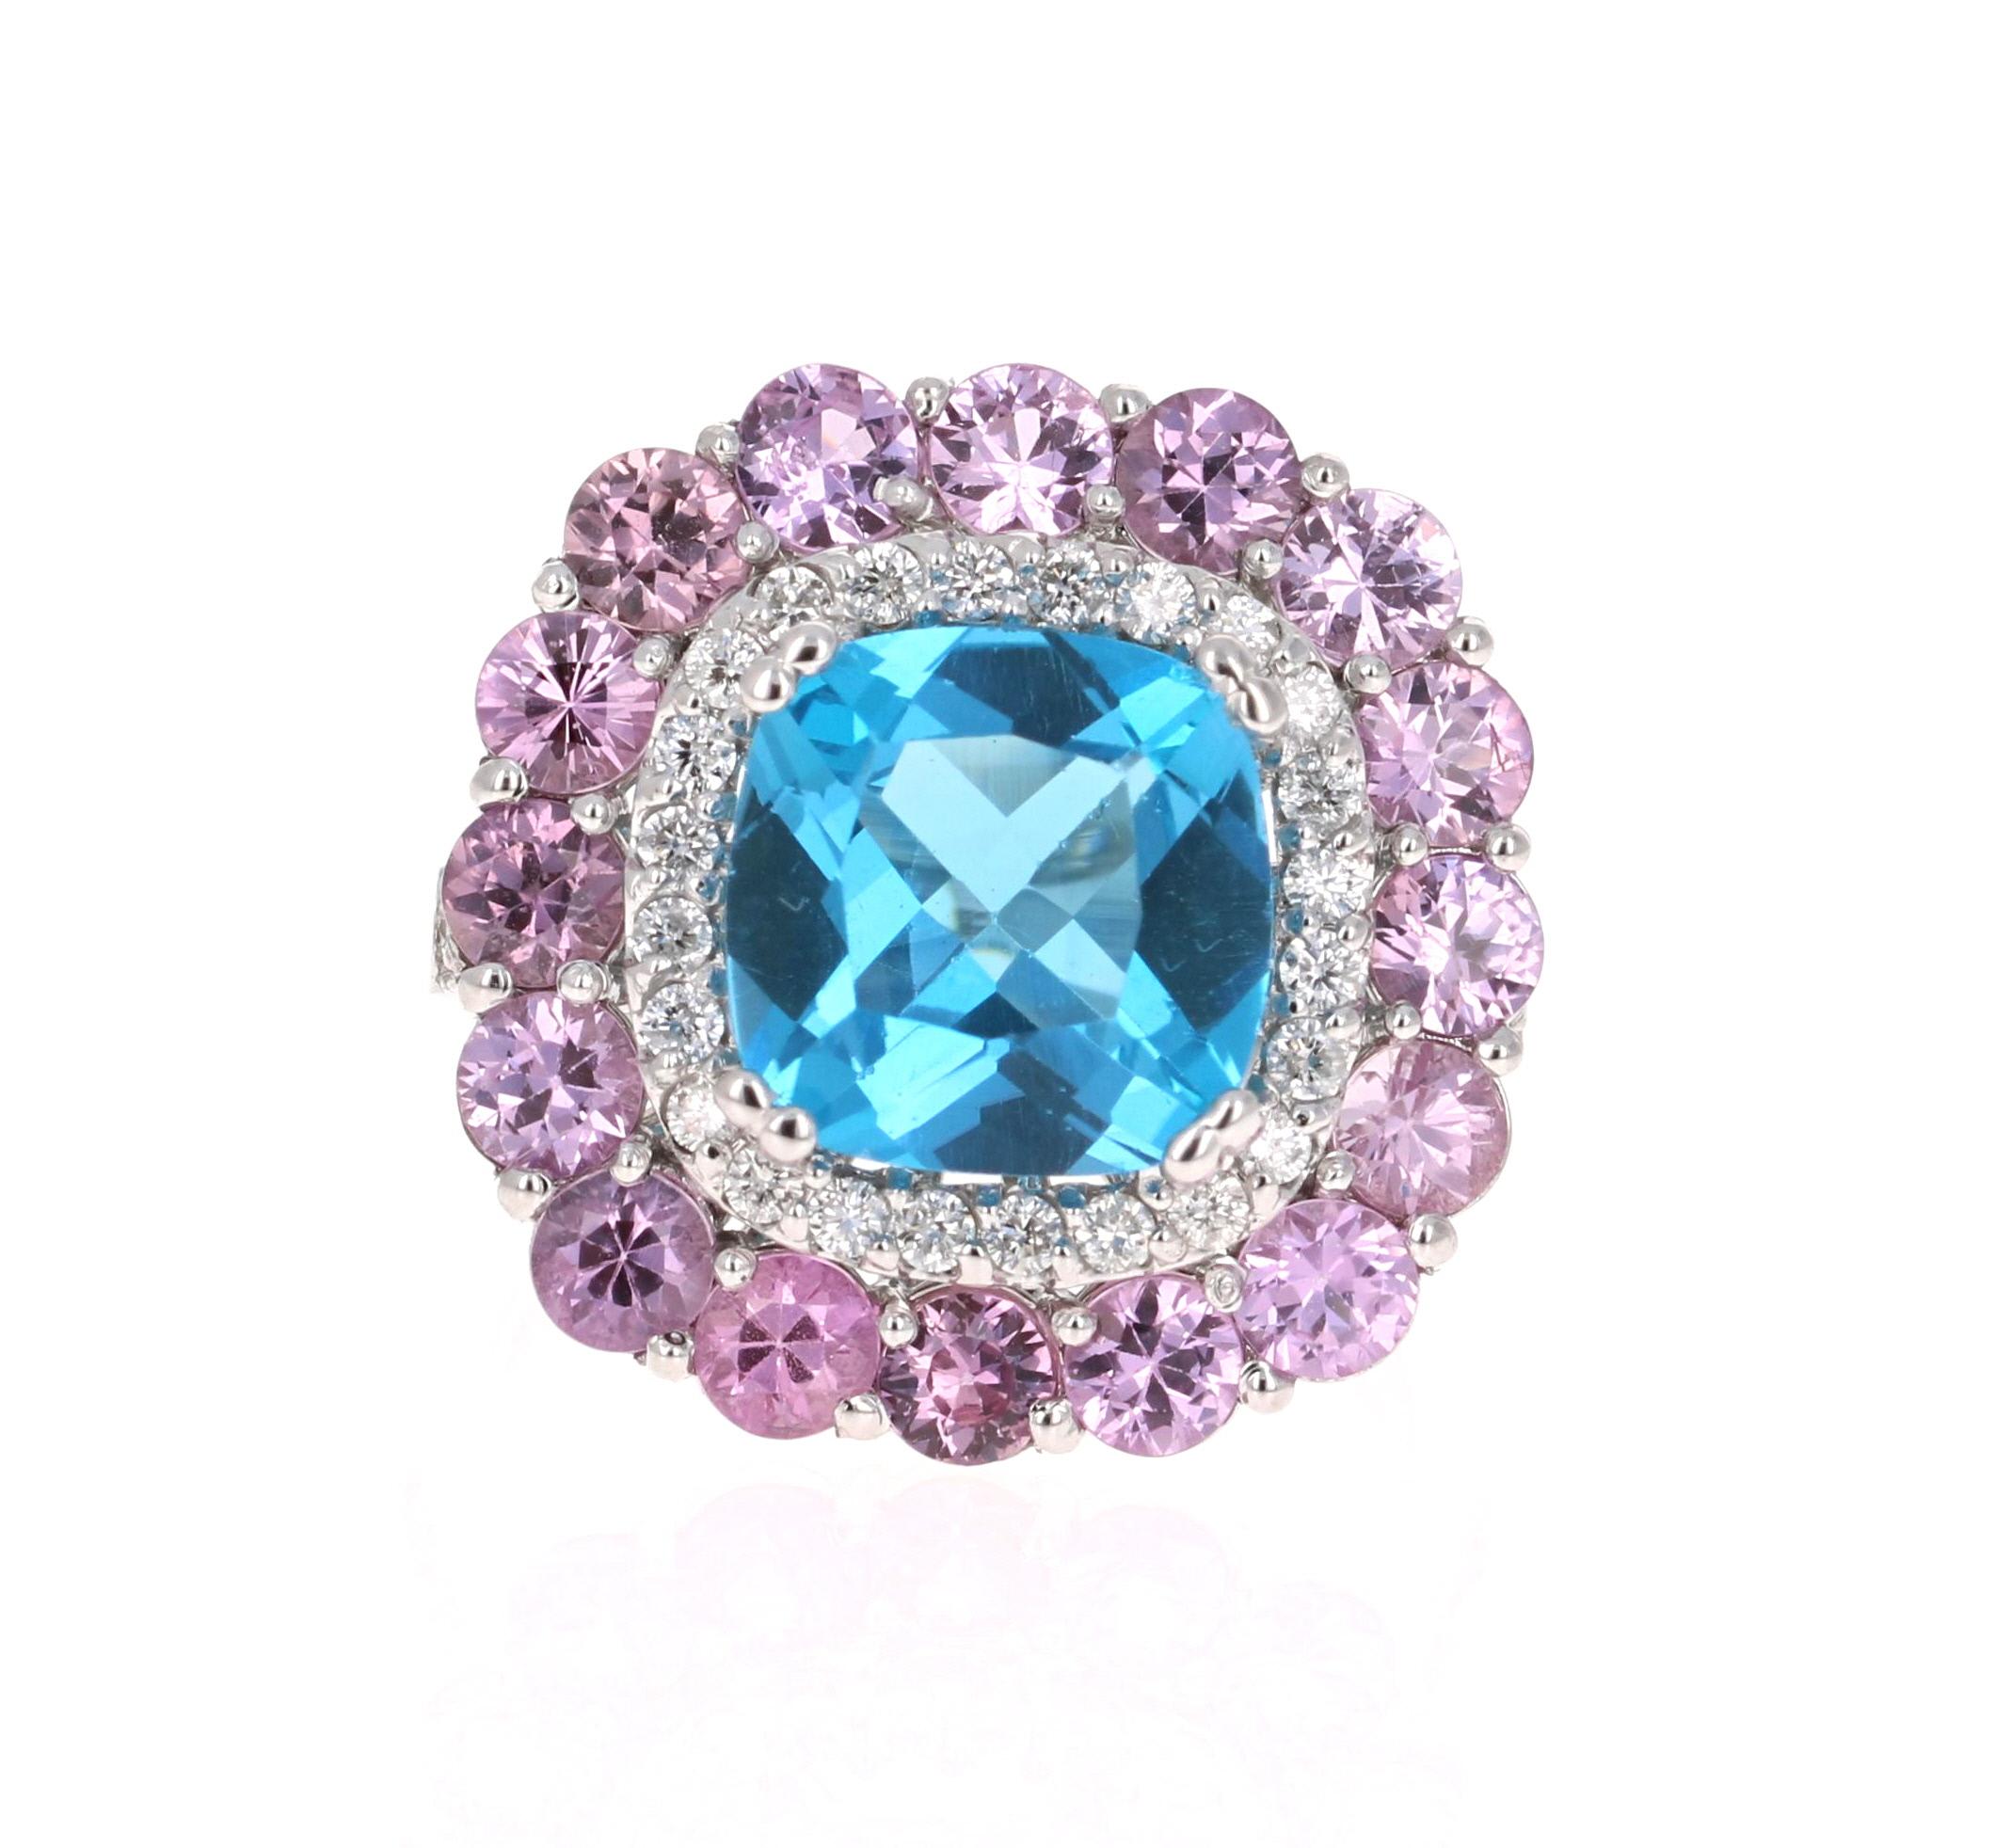 Beautiful to say the Least! 

This Ring has a magnificent Cushion Cut Blue Topaz that weighs 4.71 carats and is surrounded by 19 Round Cut Pink Sapphires that weigh 3.13 carats and 38 Round Cut Diamonds that weigh 0.50 Carats (Clarity: SI, Color: